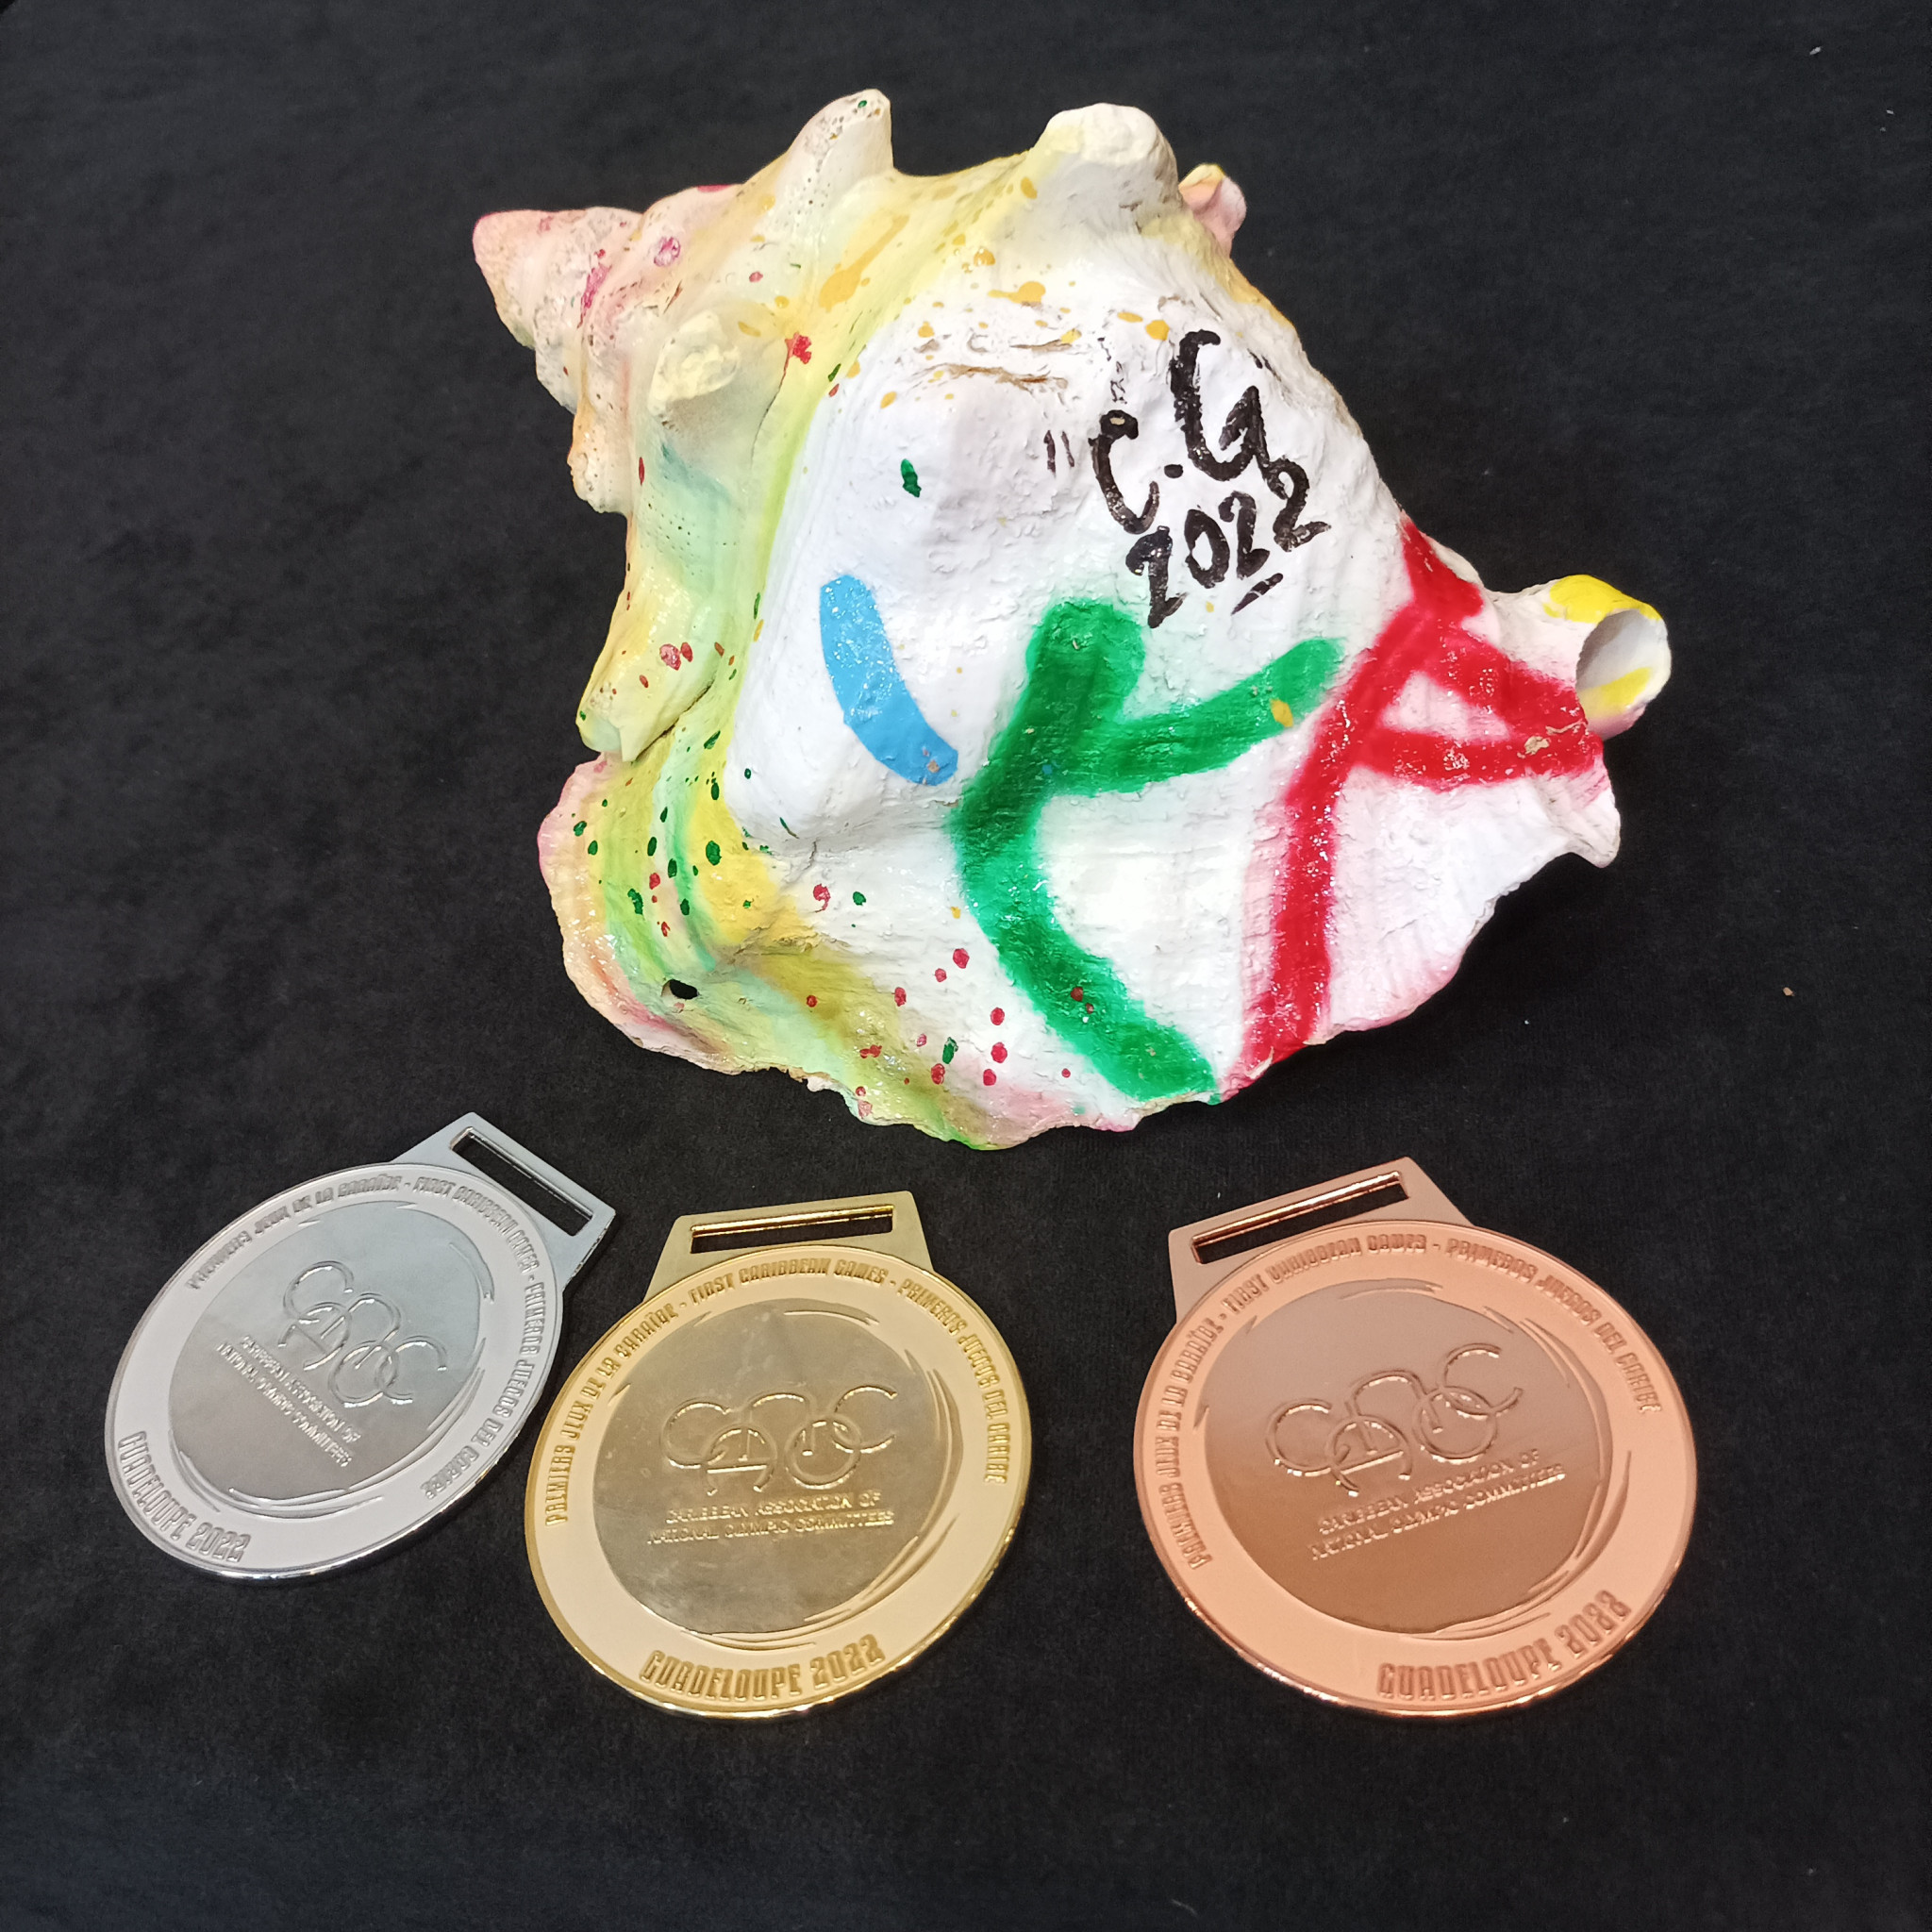 The conch shell and medals used for the inaugural Caribbean Games ©ITG